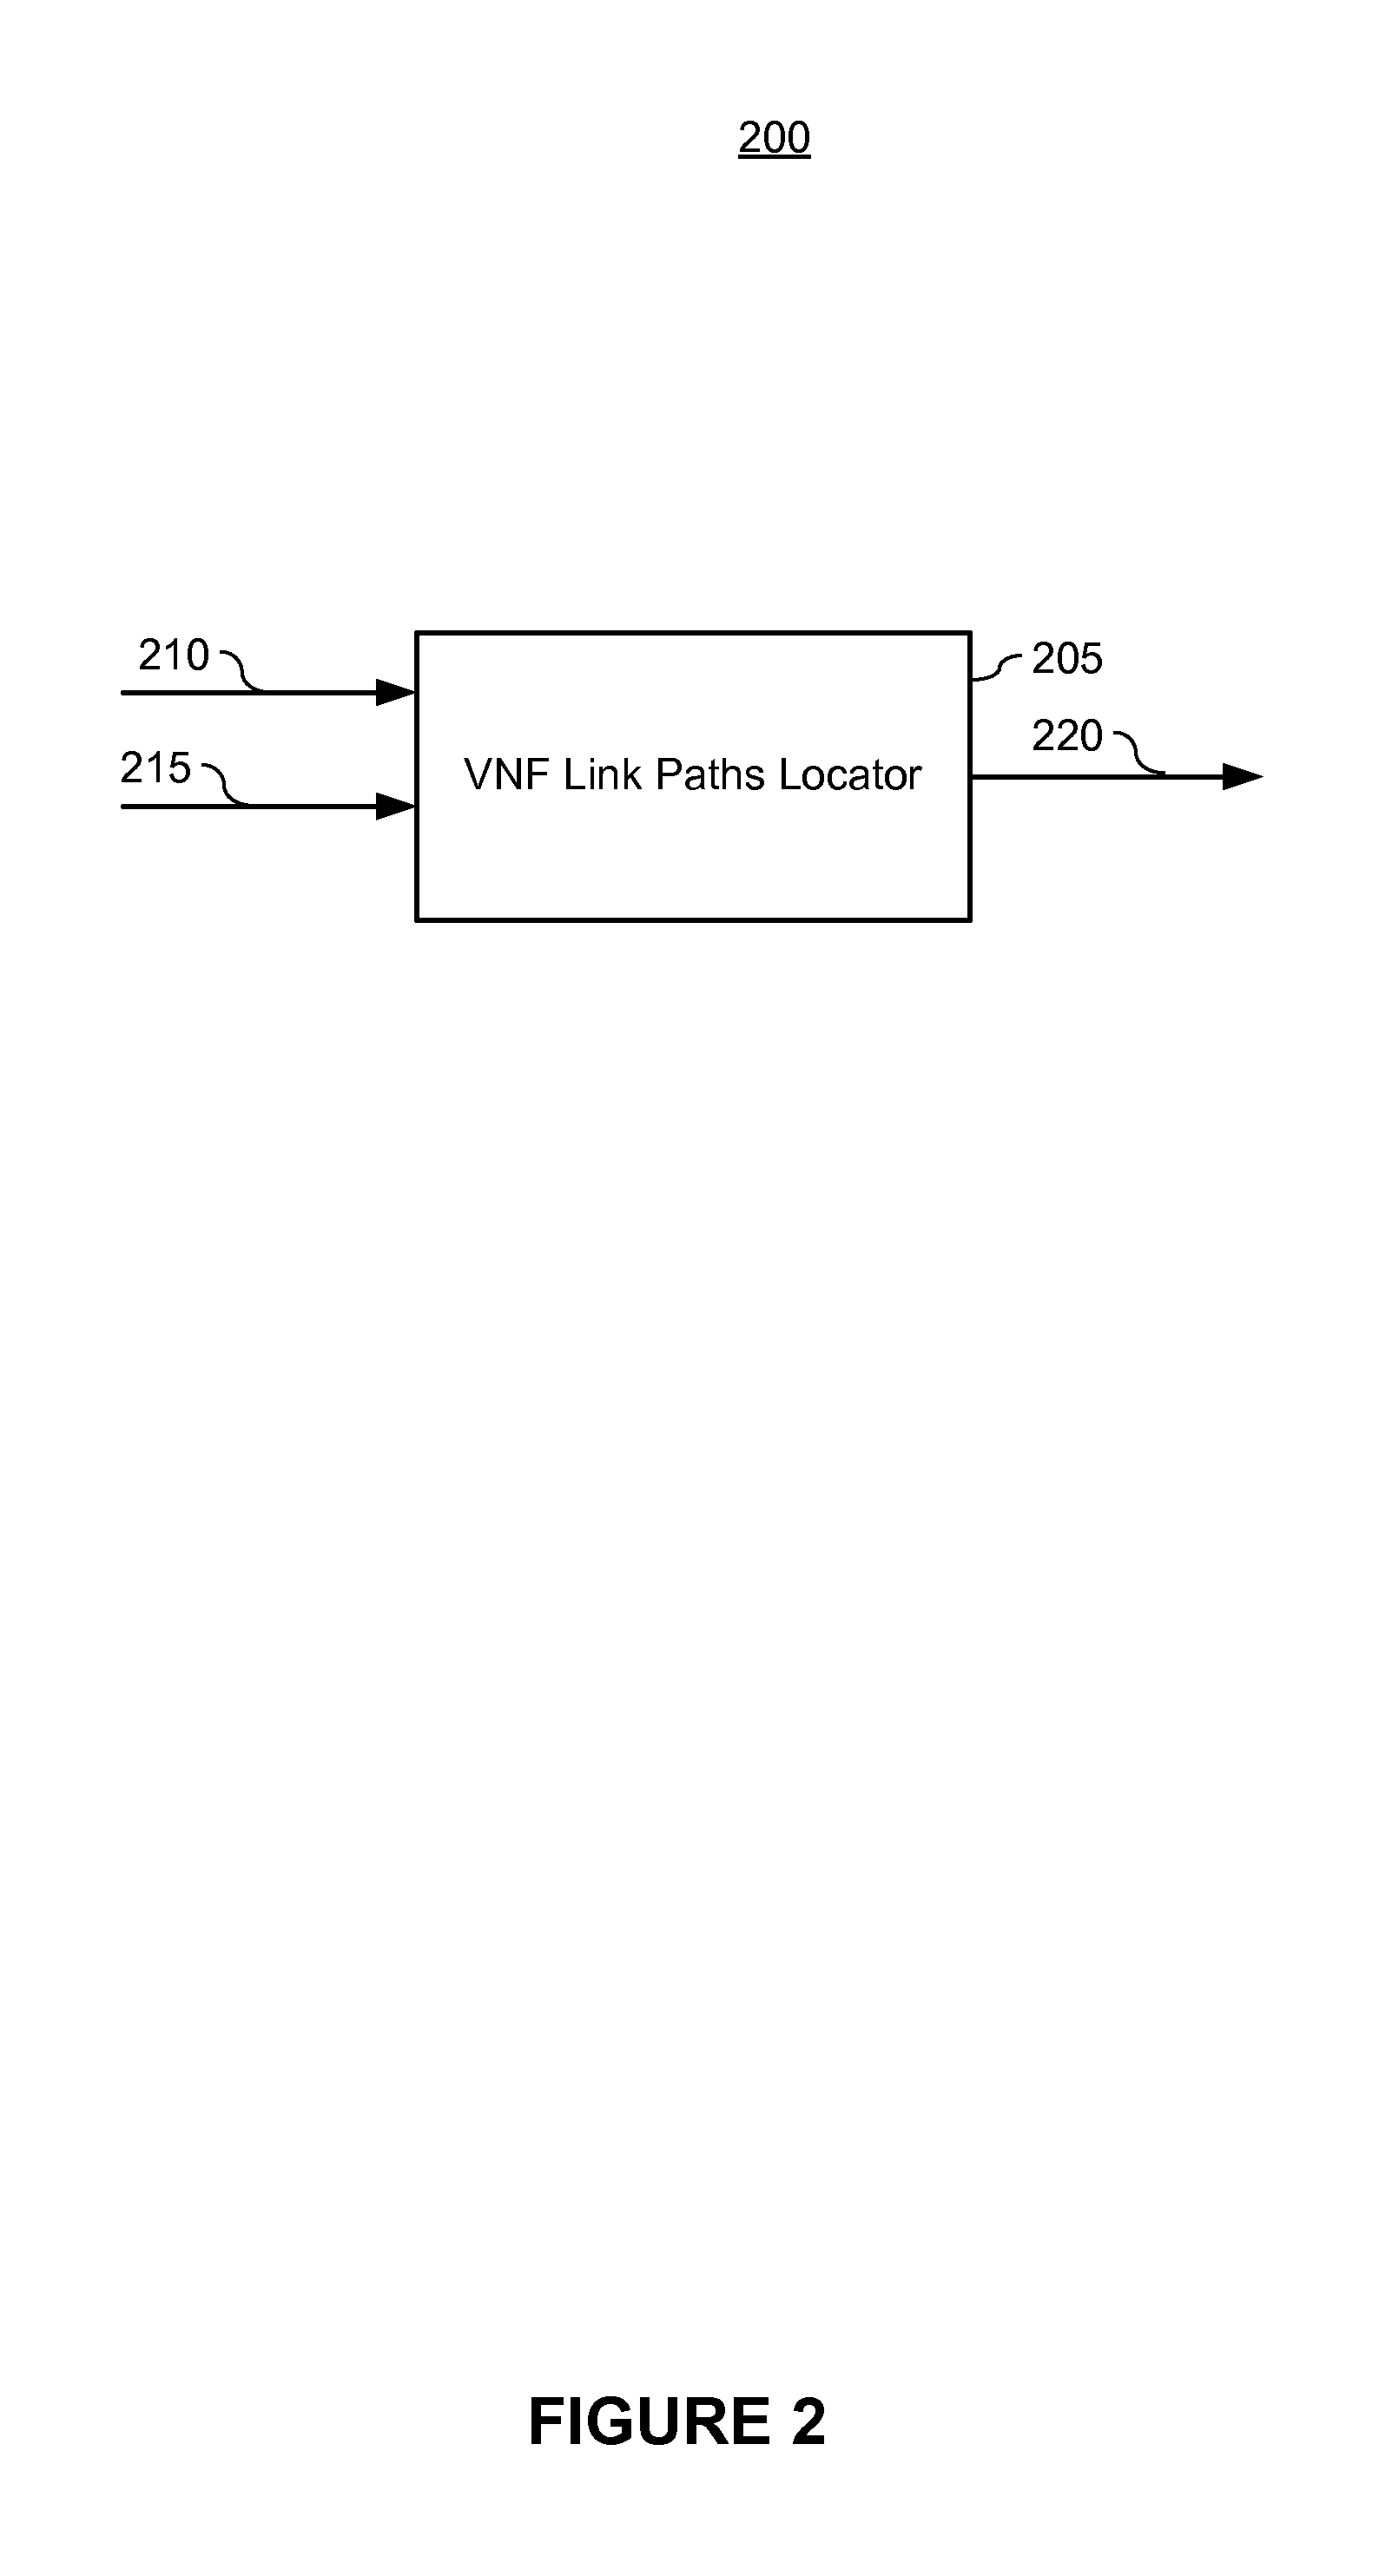 System and method for adaptive paths locator for virtual network function links